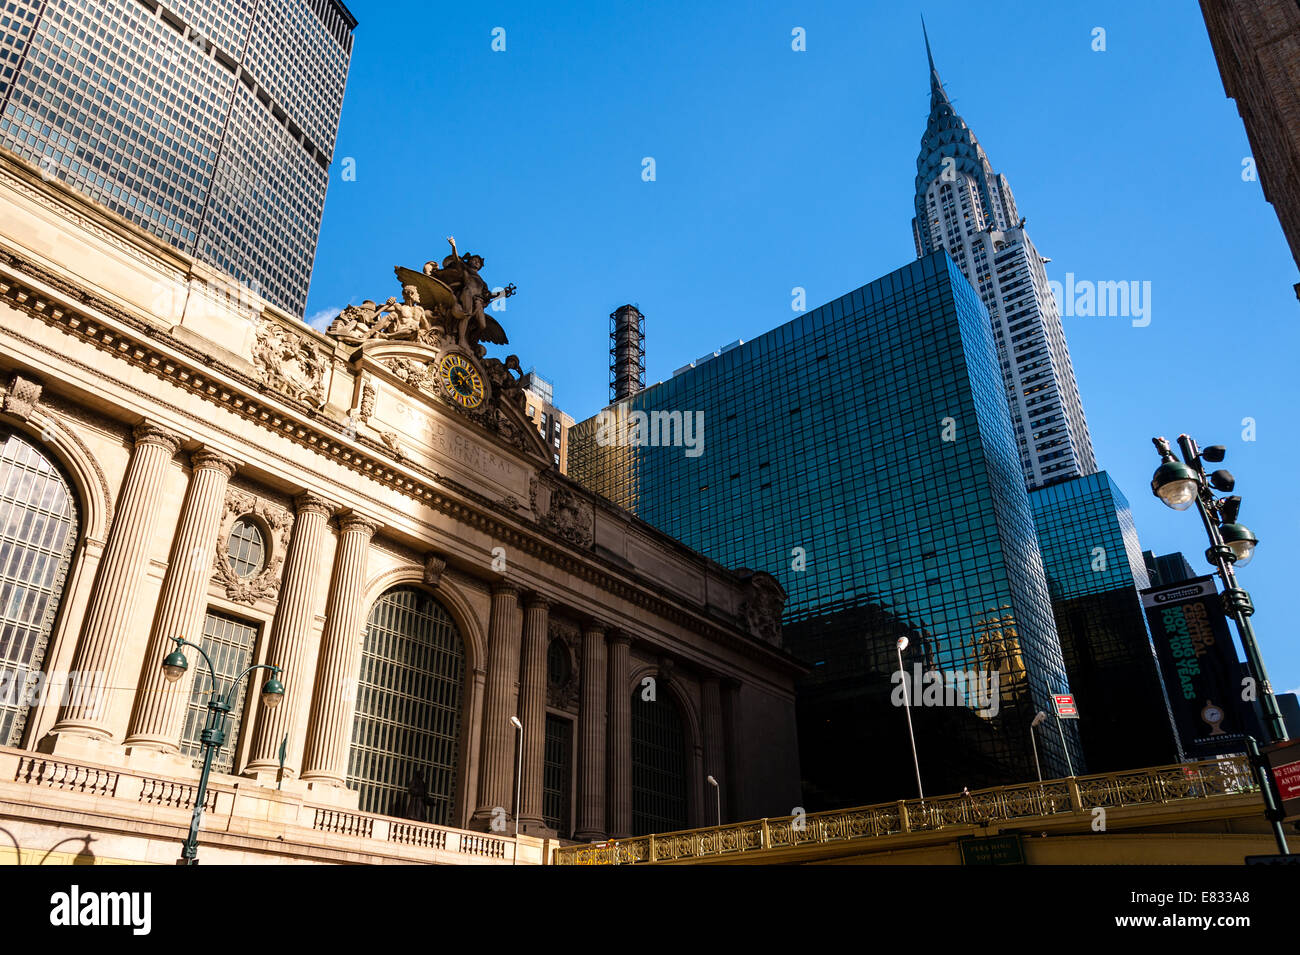 US, New York City. Grand Central Station, Chrysler Building in the background. Stock Photo